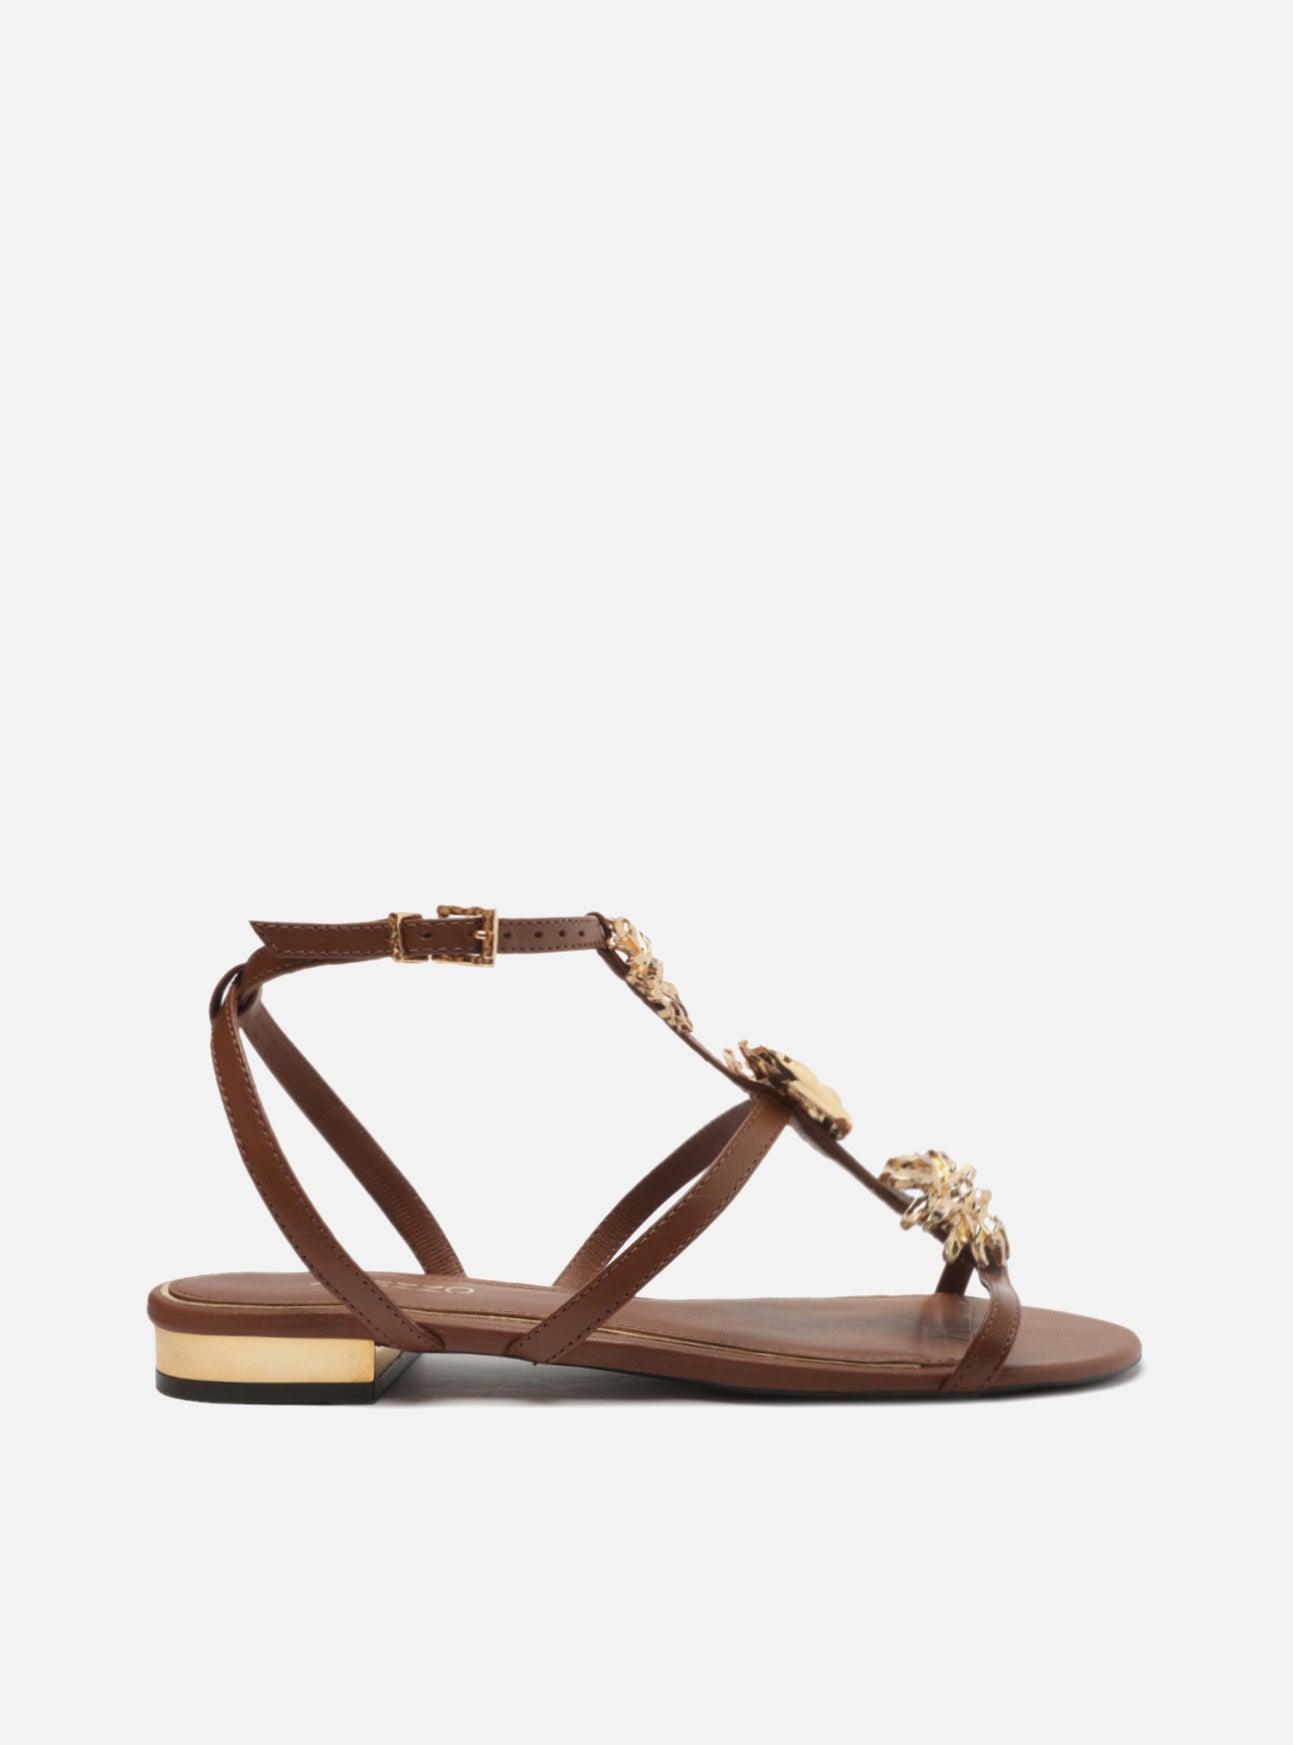 " Brown leather sandal with rounded toe. Made in straps, with golden metallic flowers and metallic closure at the ankle. "